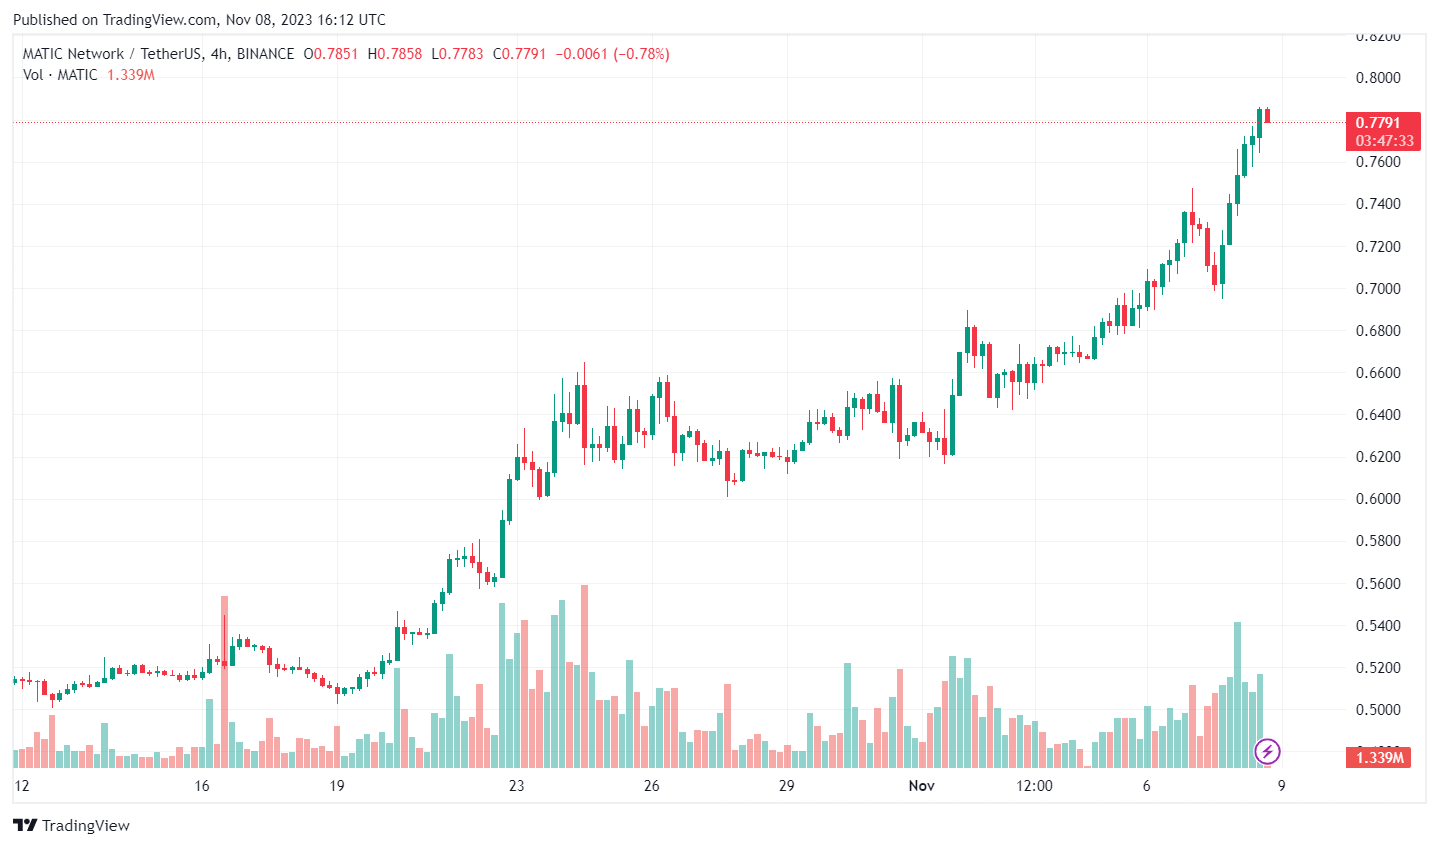 MATIC/USDT 4-hour candle chart.